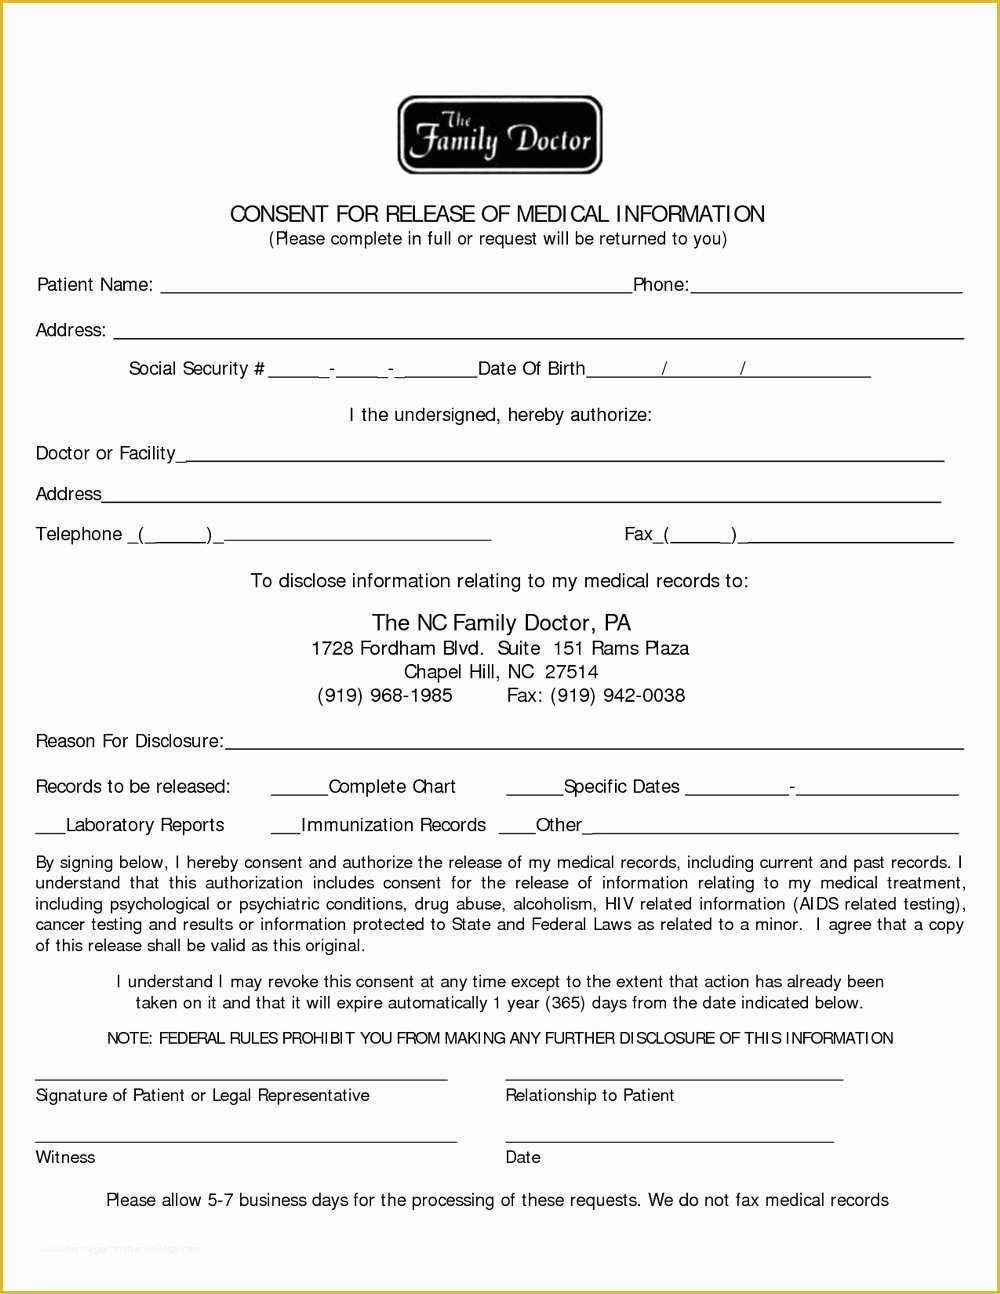 Free Last Will and Testament Template Pdf Of Free Printable Last Will and Testament forms Pdf forms